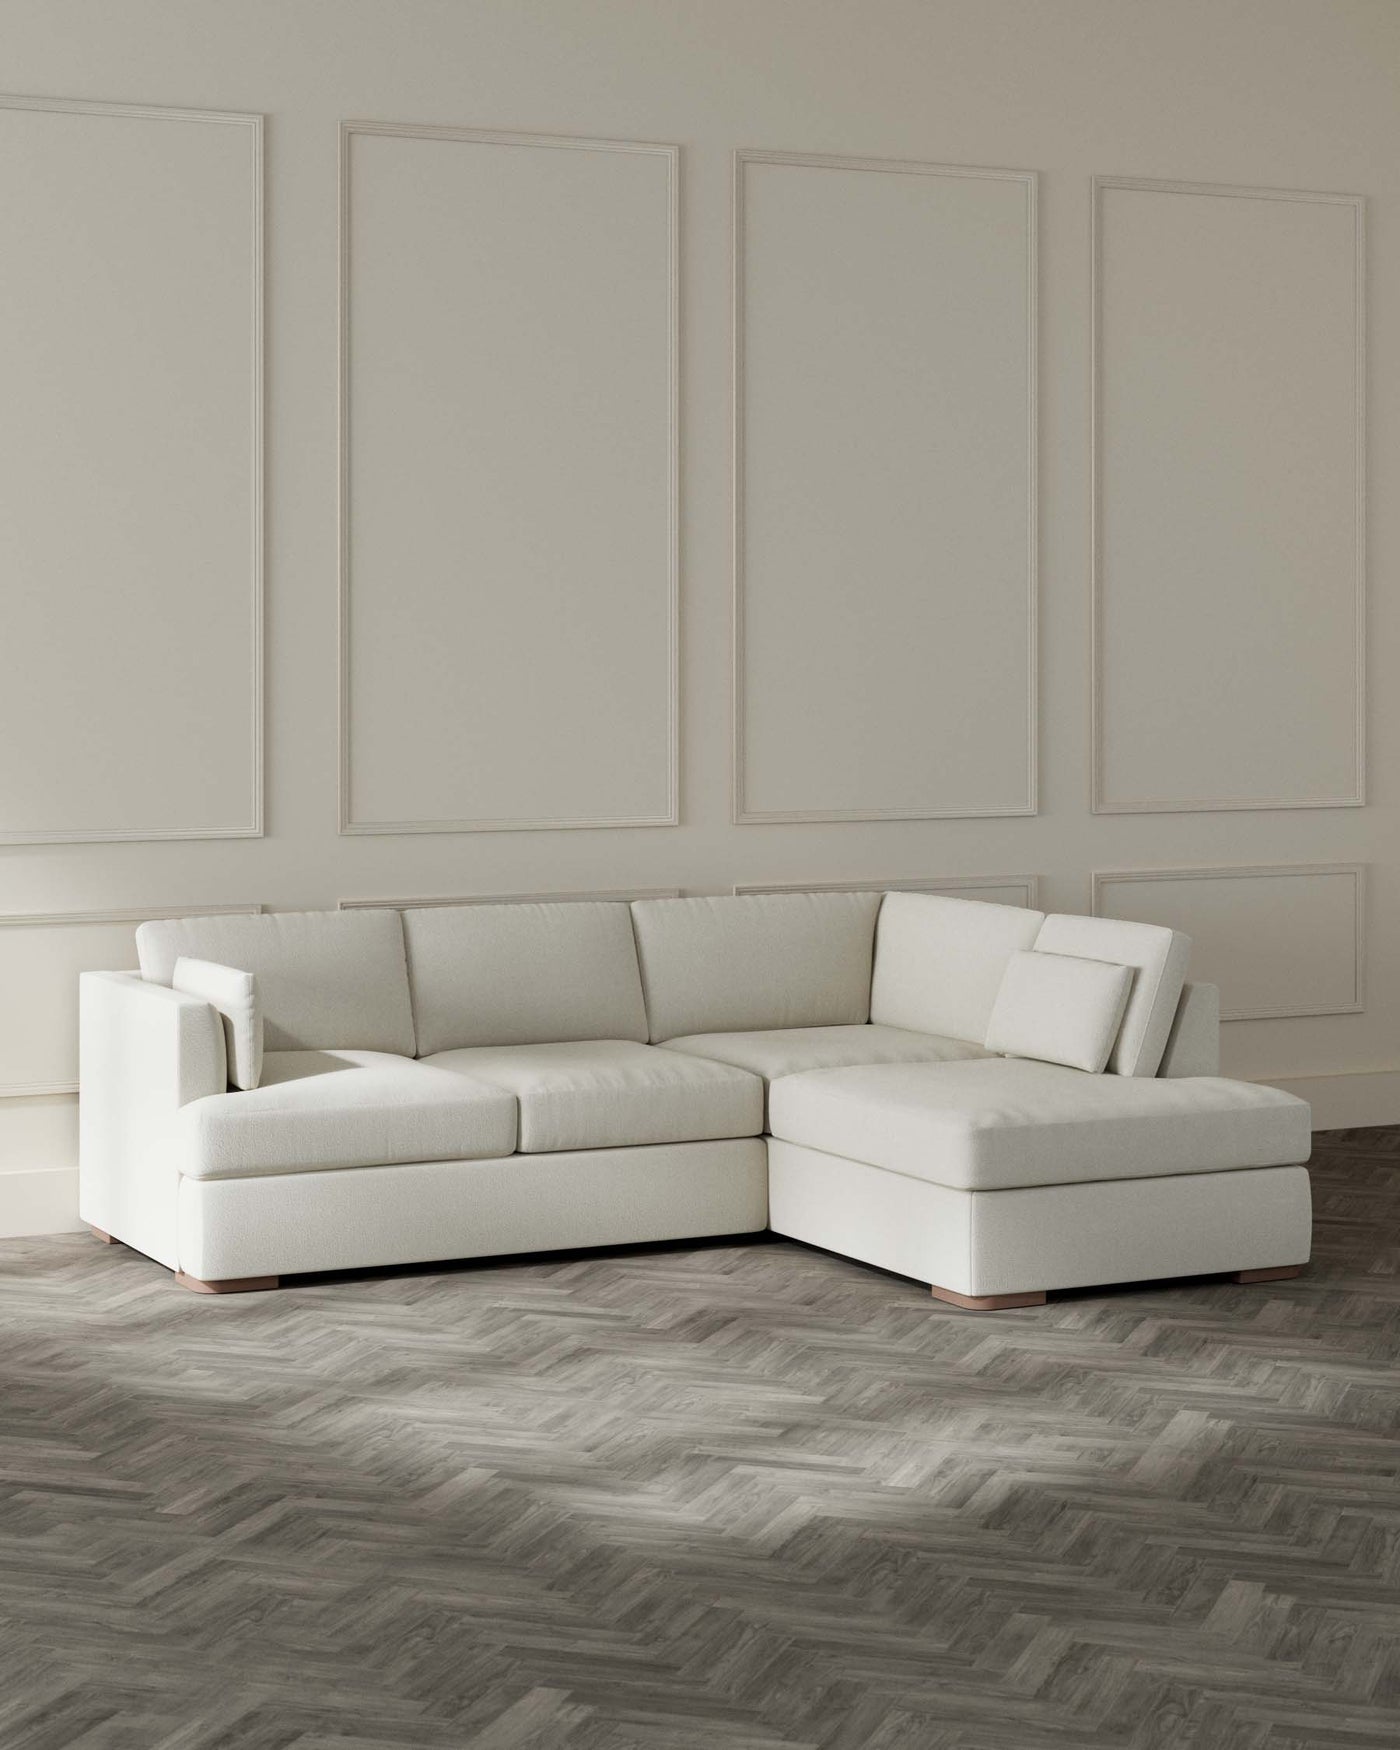 A modern L-shaped sectional sofa in a light cream fabric with a chaise on the left and a minimalist design, set against a neutral wall with decorative panels and on a herringbone-patterned wooden floor.